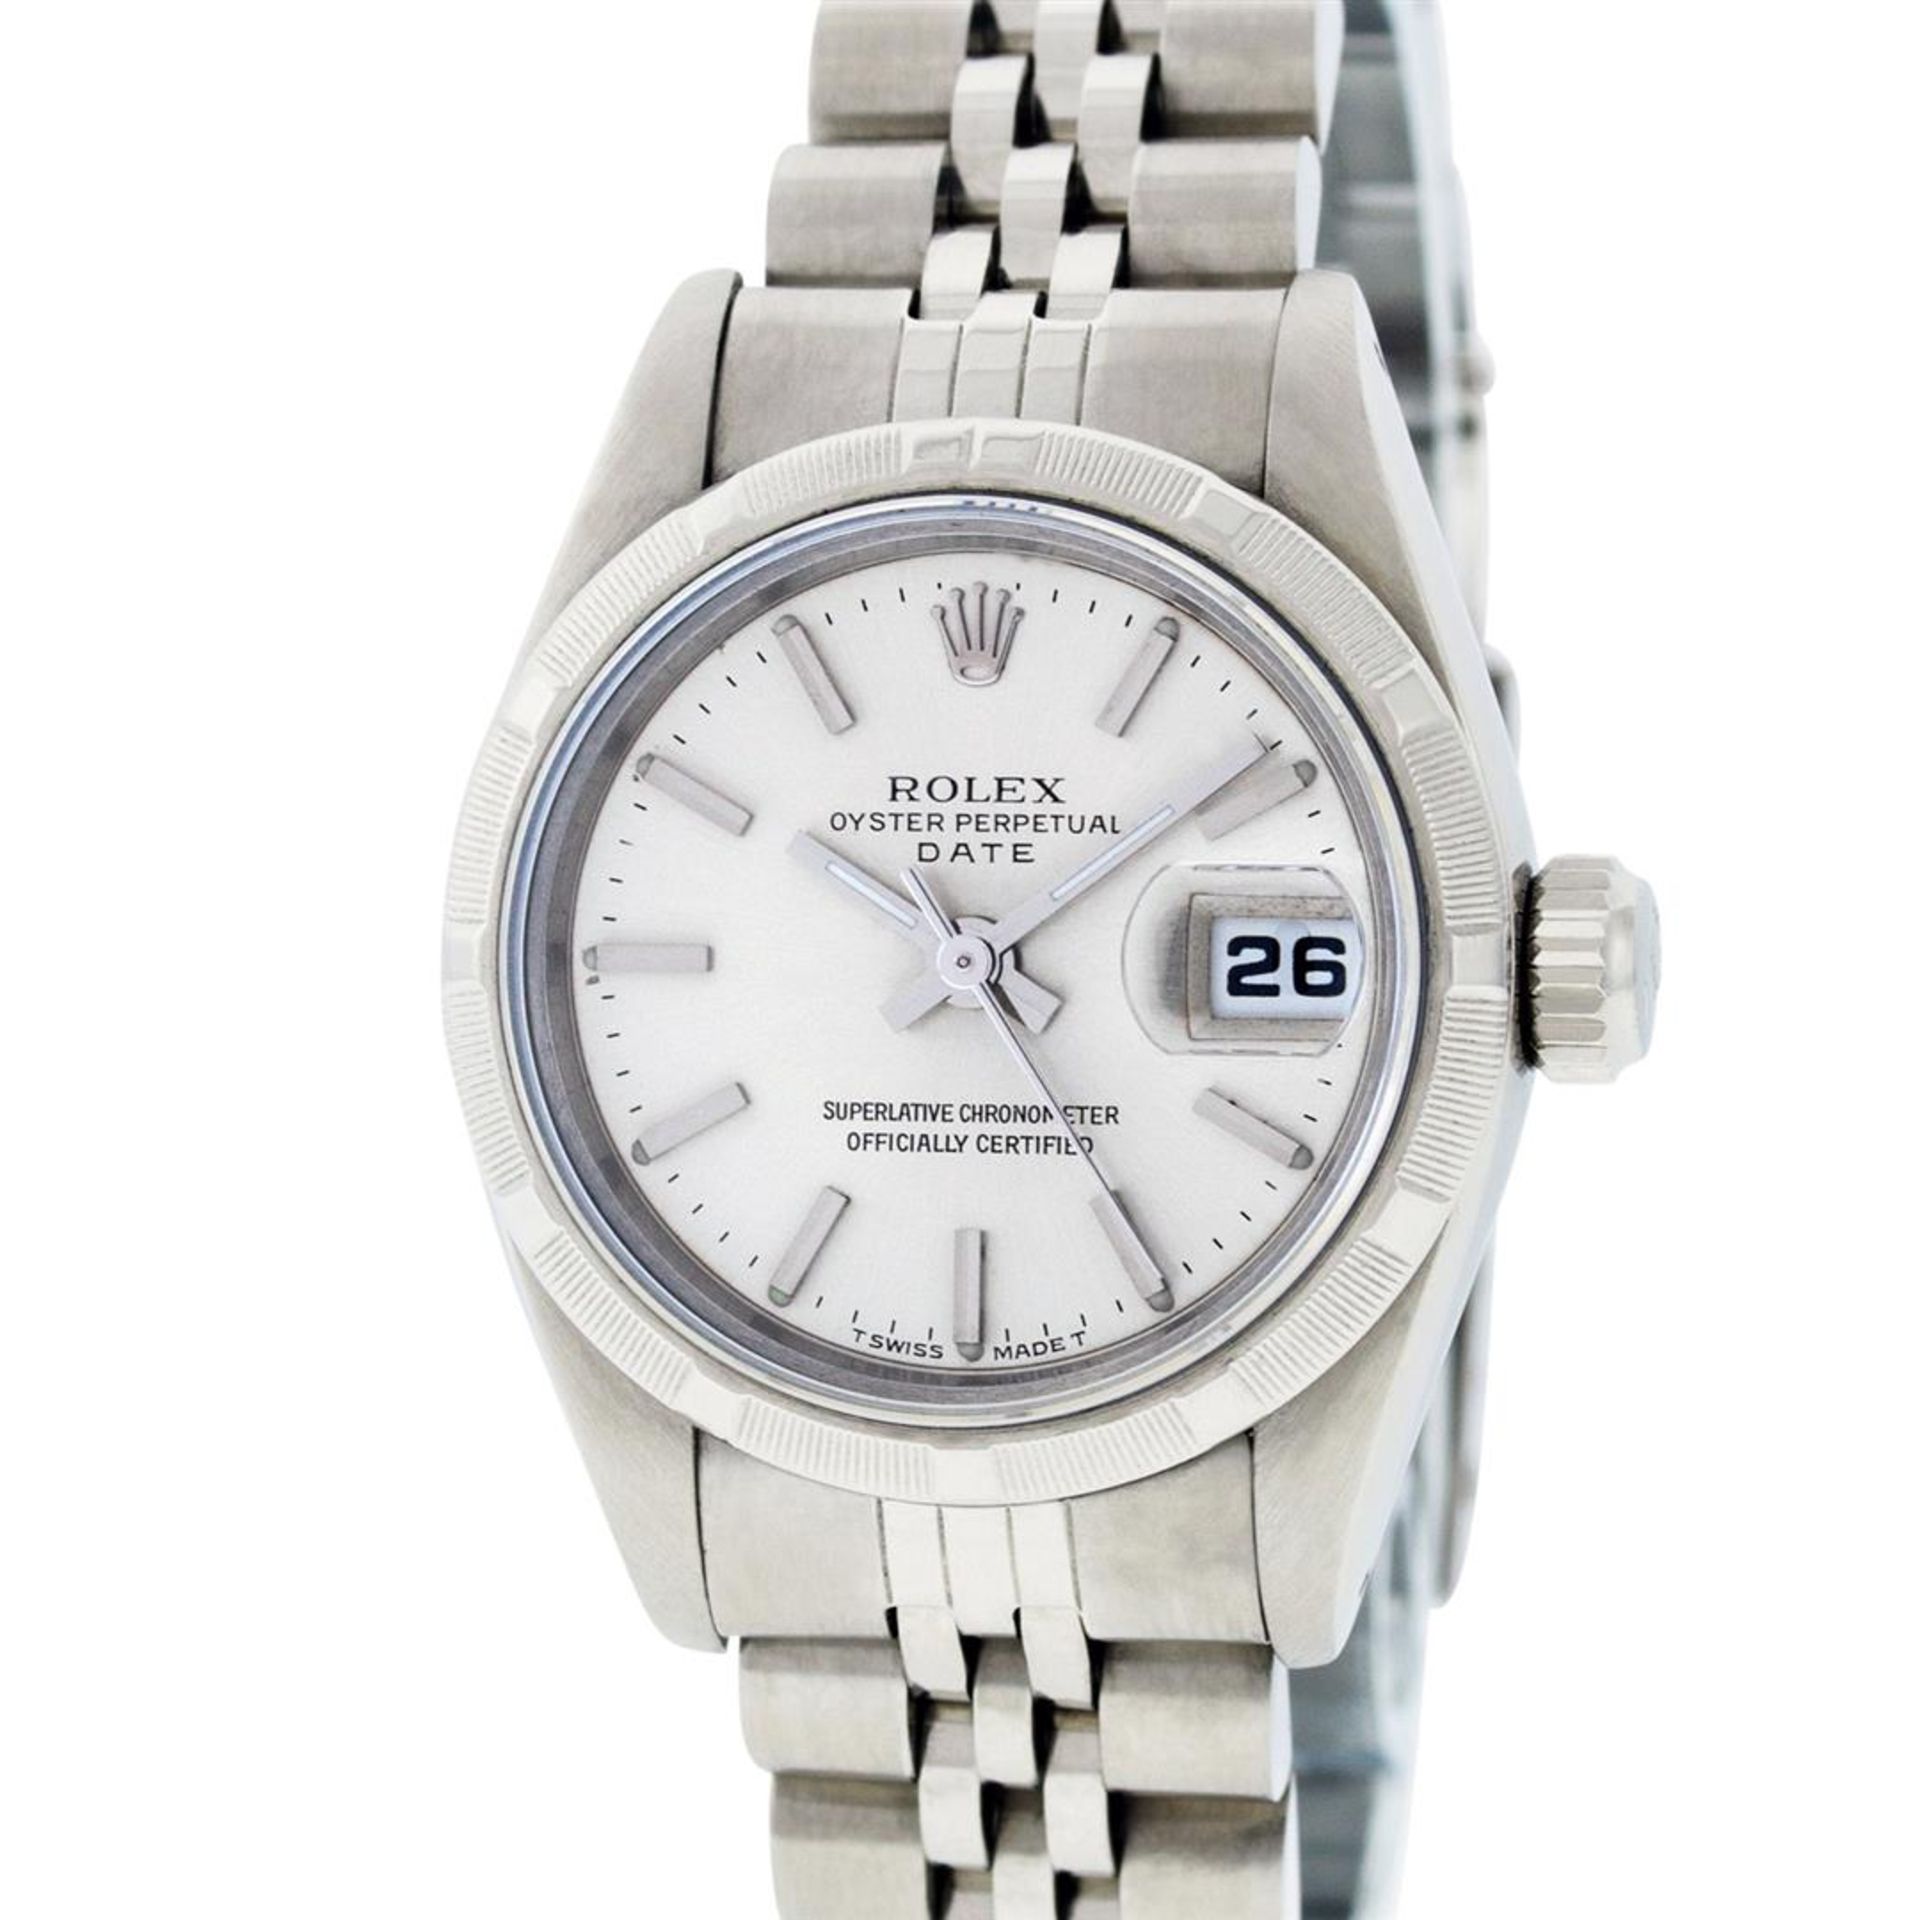 Rolex Ladies Stainless Steel Silver Index 26MM Oyster Perpetual Datejust Wristwa - Image 2 of 7